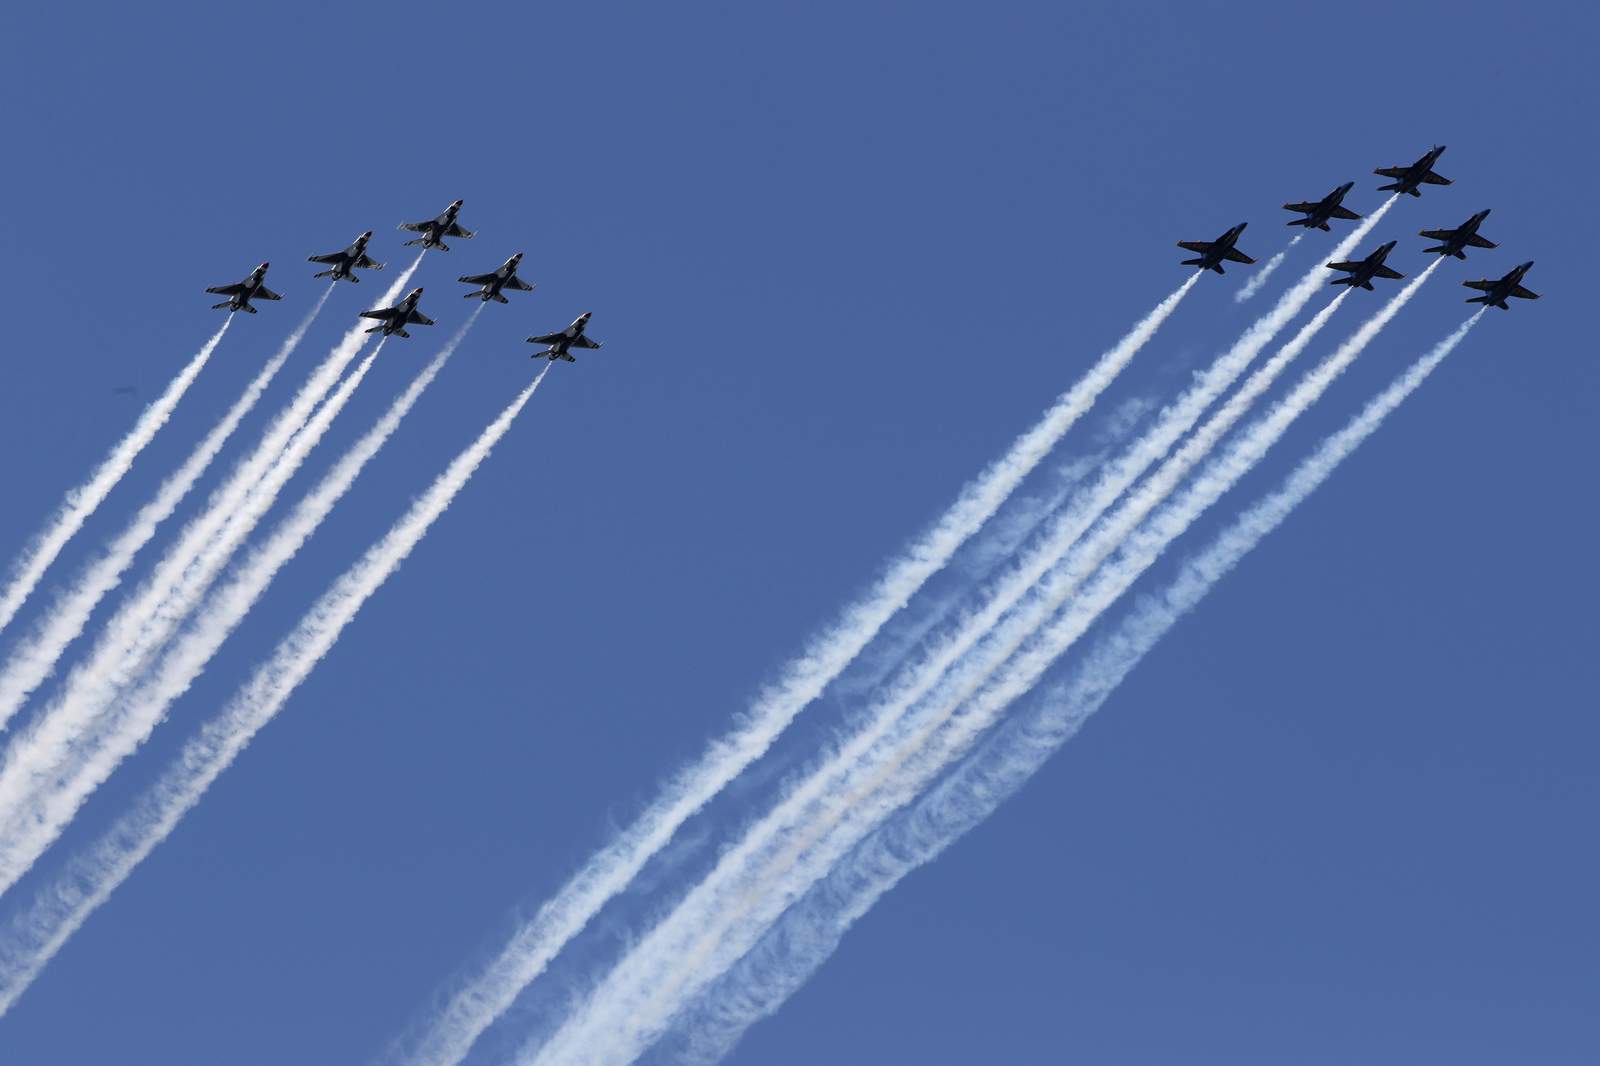 Here are some of the best places to watch the Blue Angels flyover in Houston